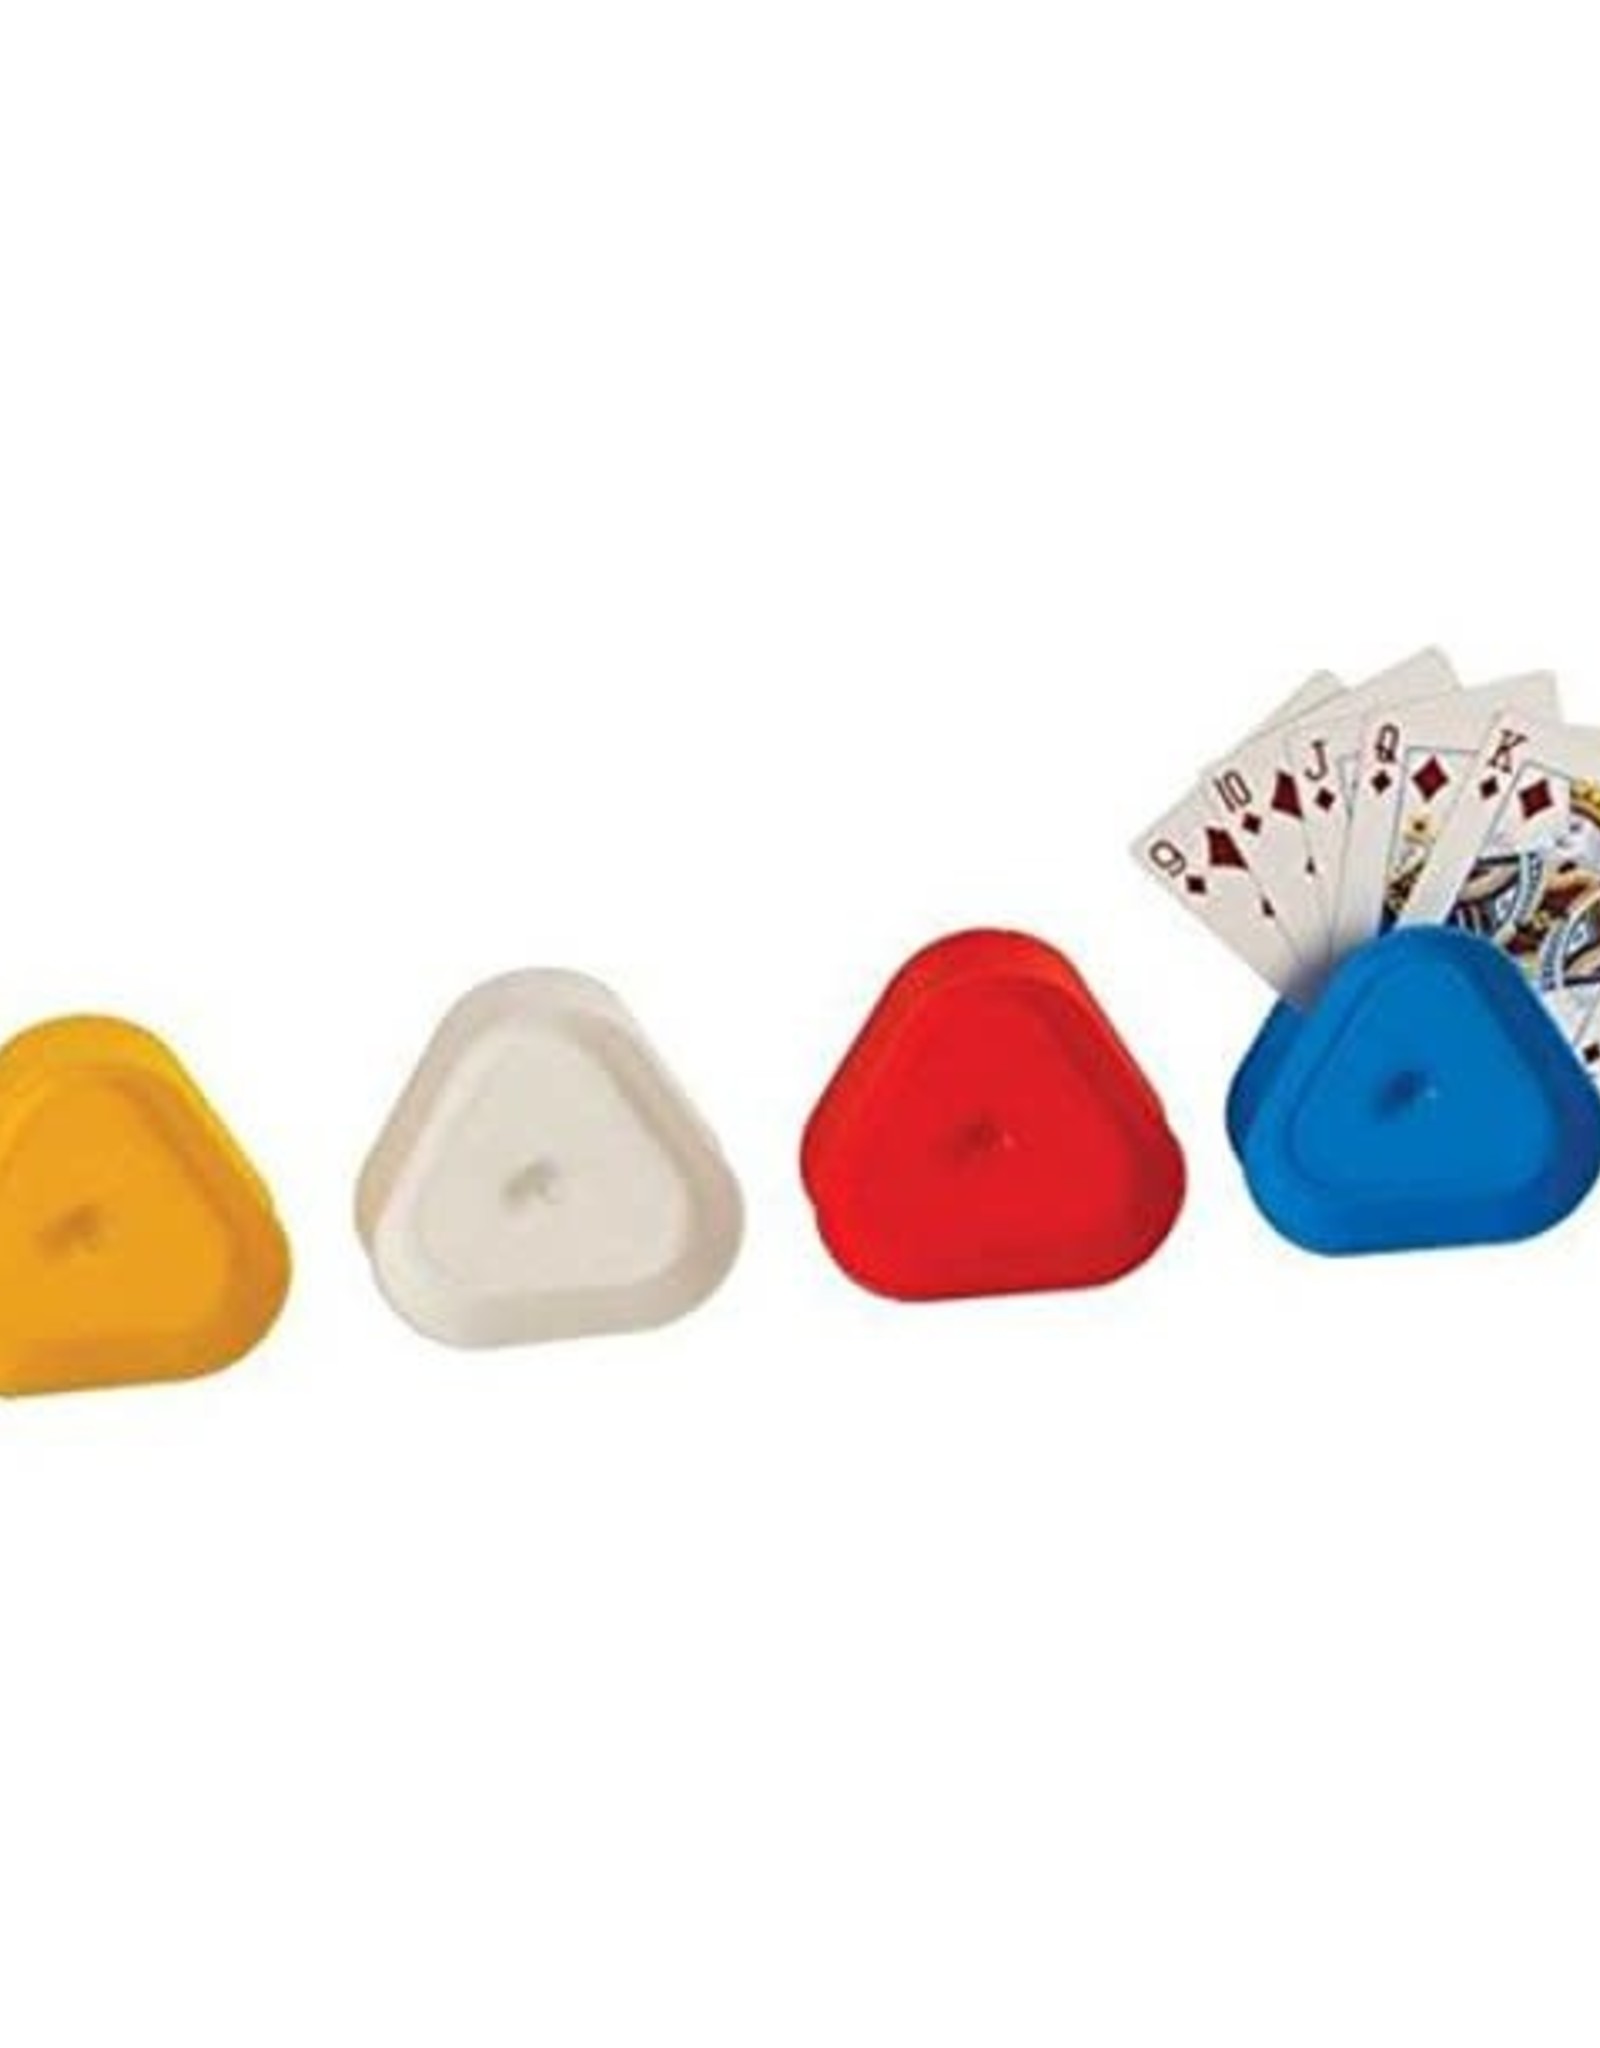 CHH Games Card Holder (Triangular, Blue/Red/White/Yellow)